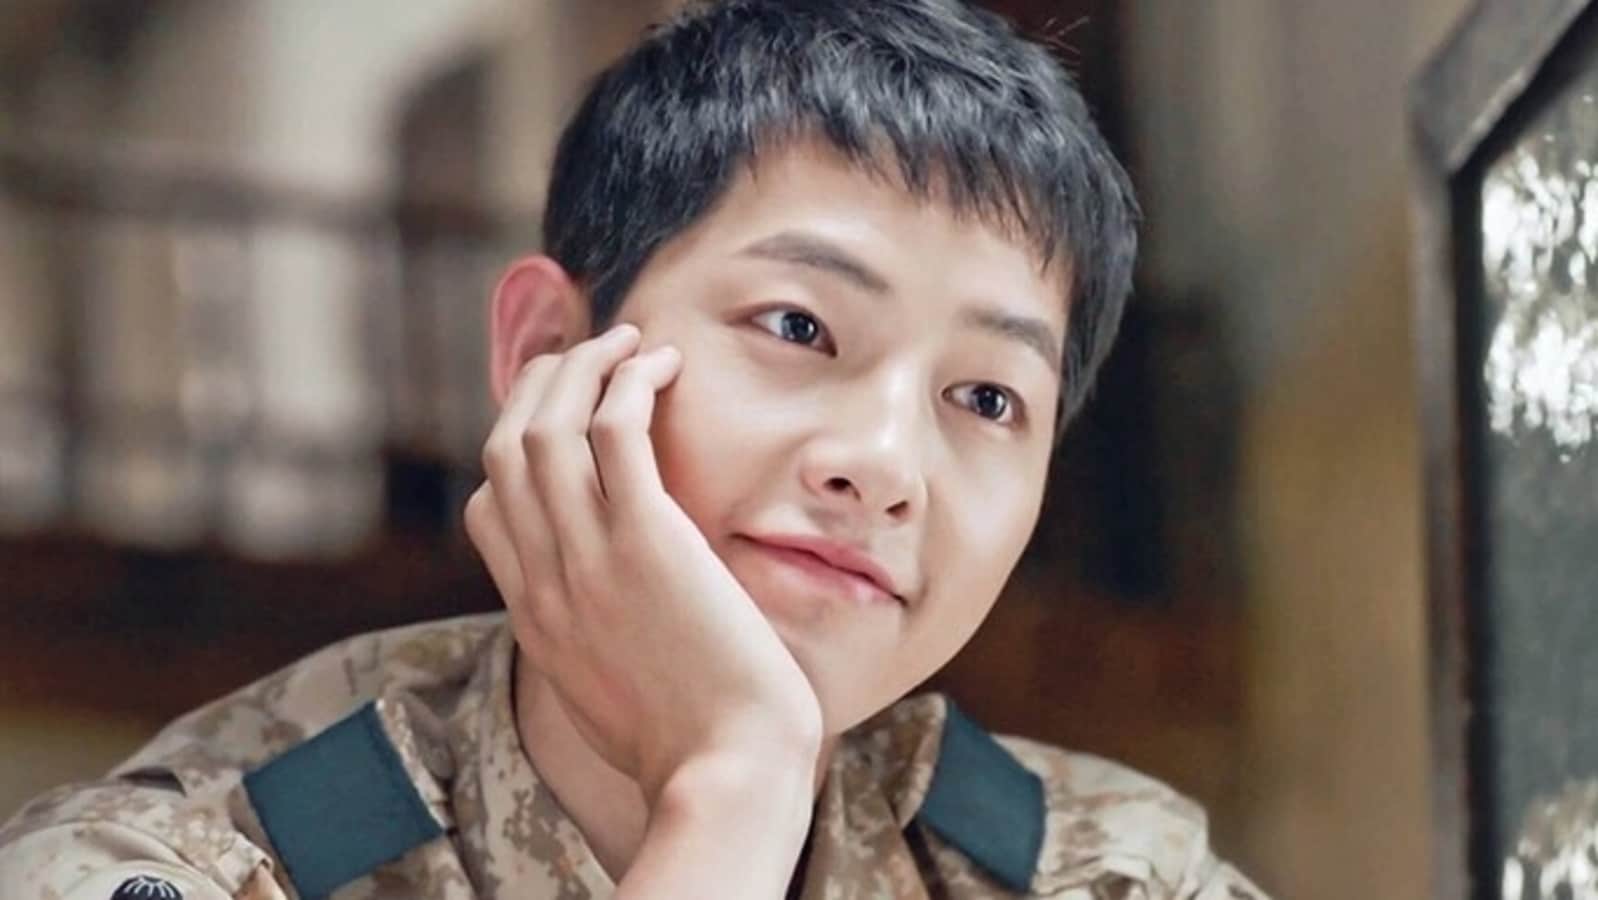 Shocking Update: Song Joong-ki and Song Hye-kyo Relationship Status Revealed - Are They Still Together? 11